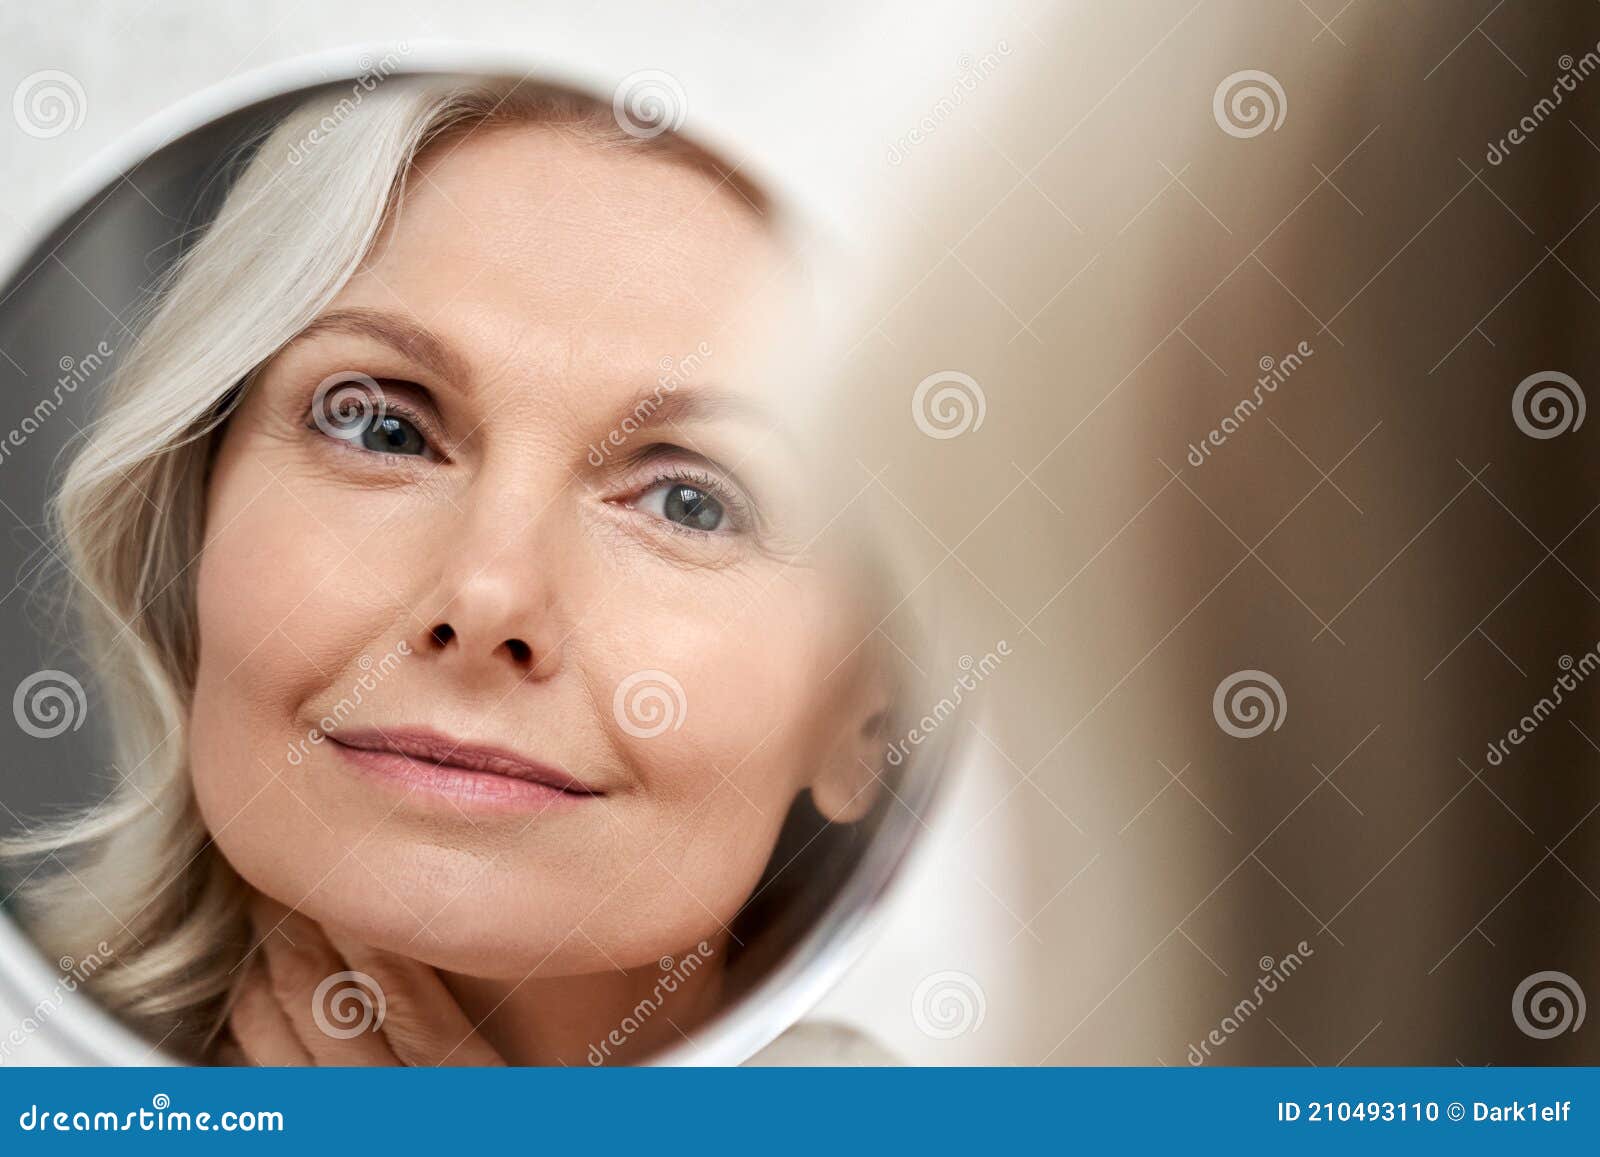 happy 50s middle aged woman touching face skin looking in mirror reflection.